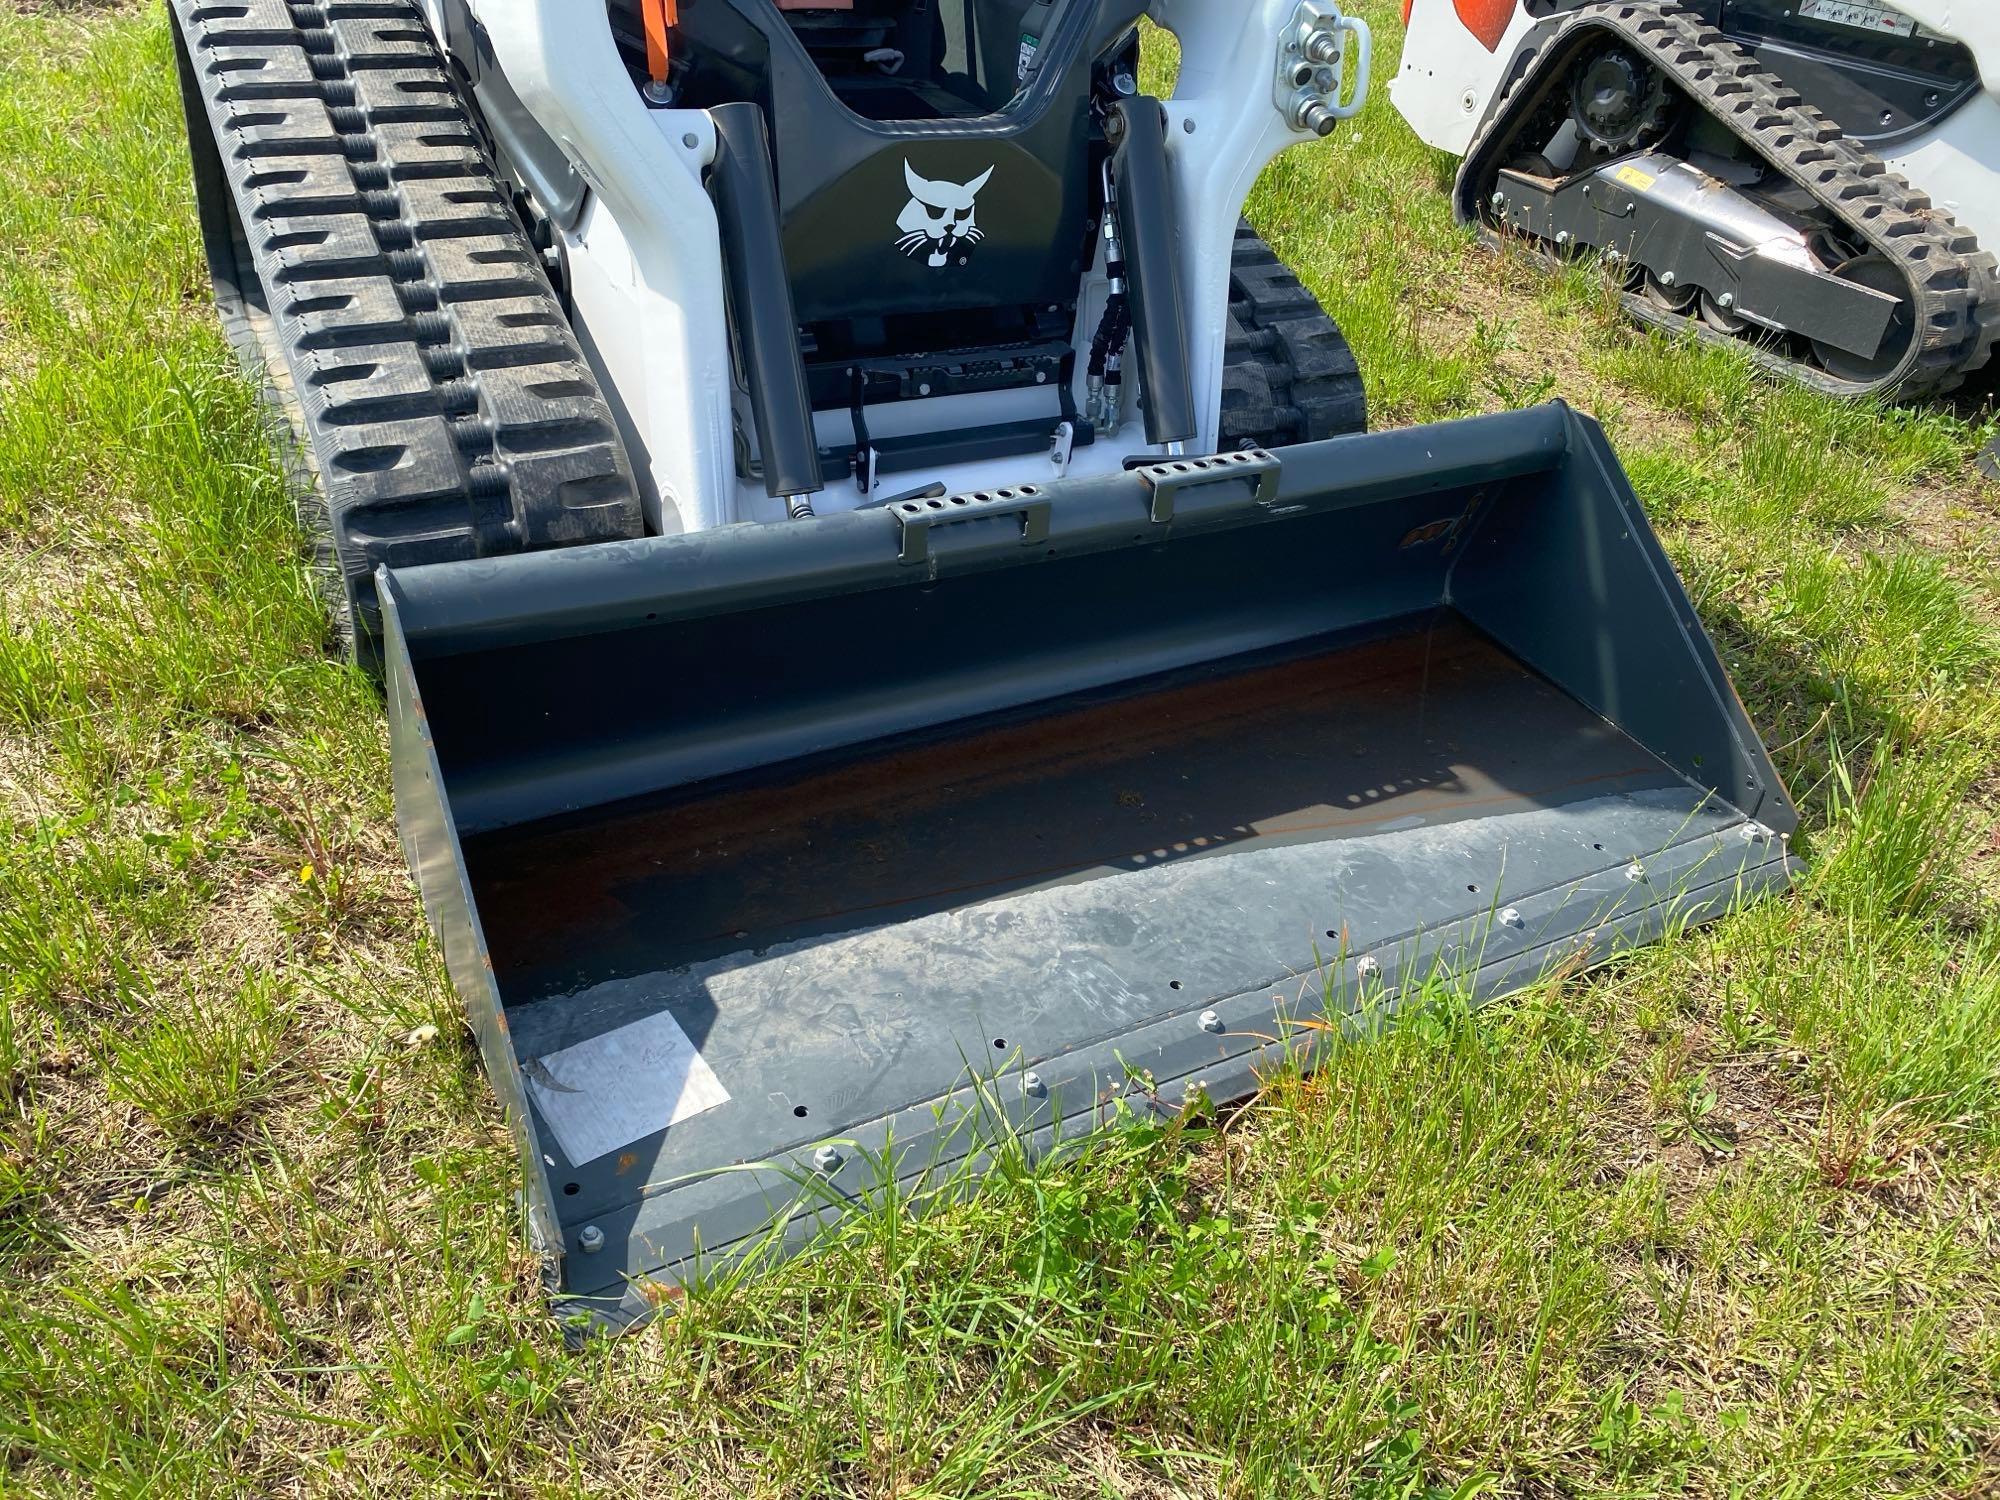 2023 BOBCAT T76 RUBBER TRACKED SKID STEER SN-26127 powered by diesel engine, equipped with rollcage,